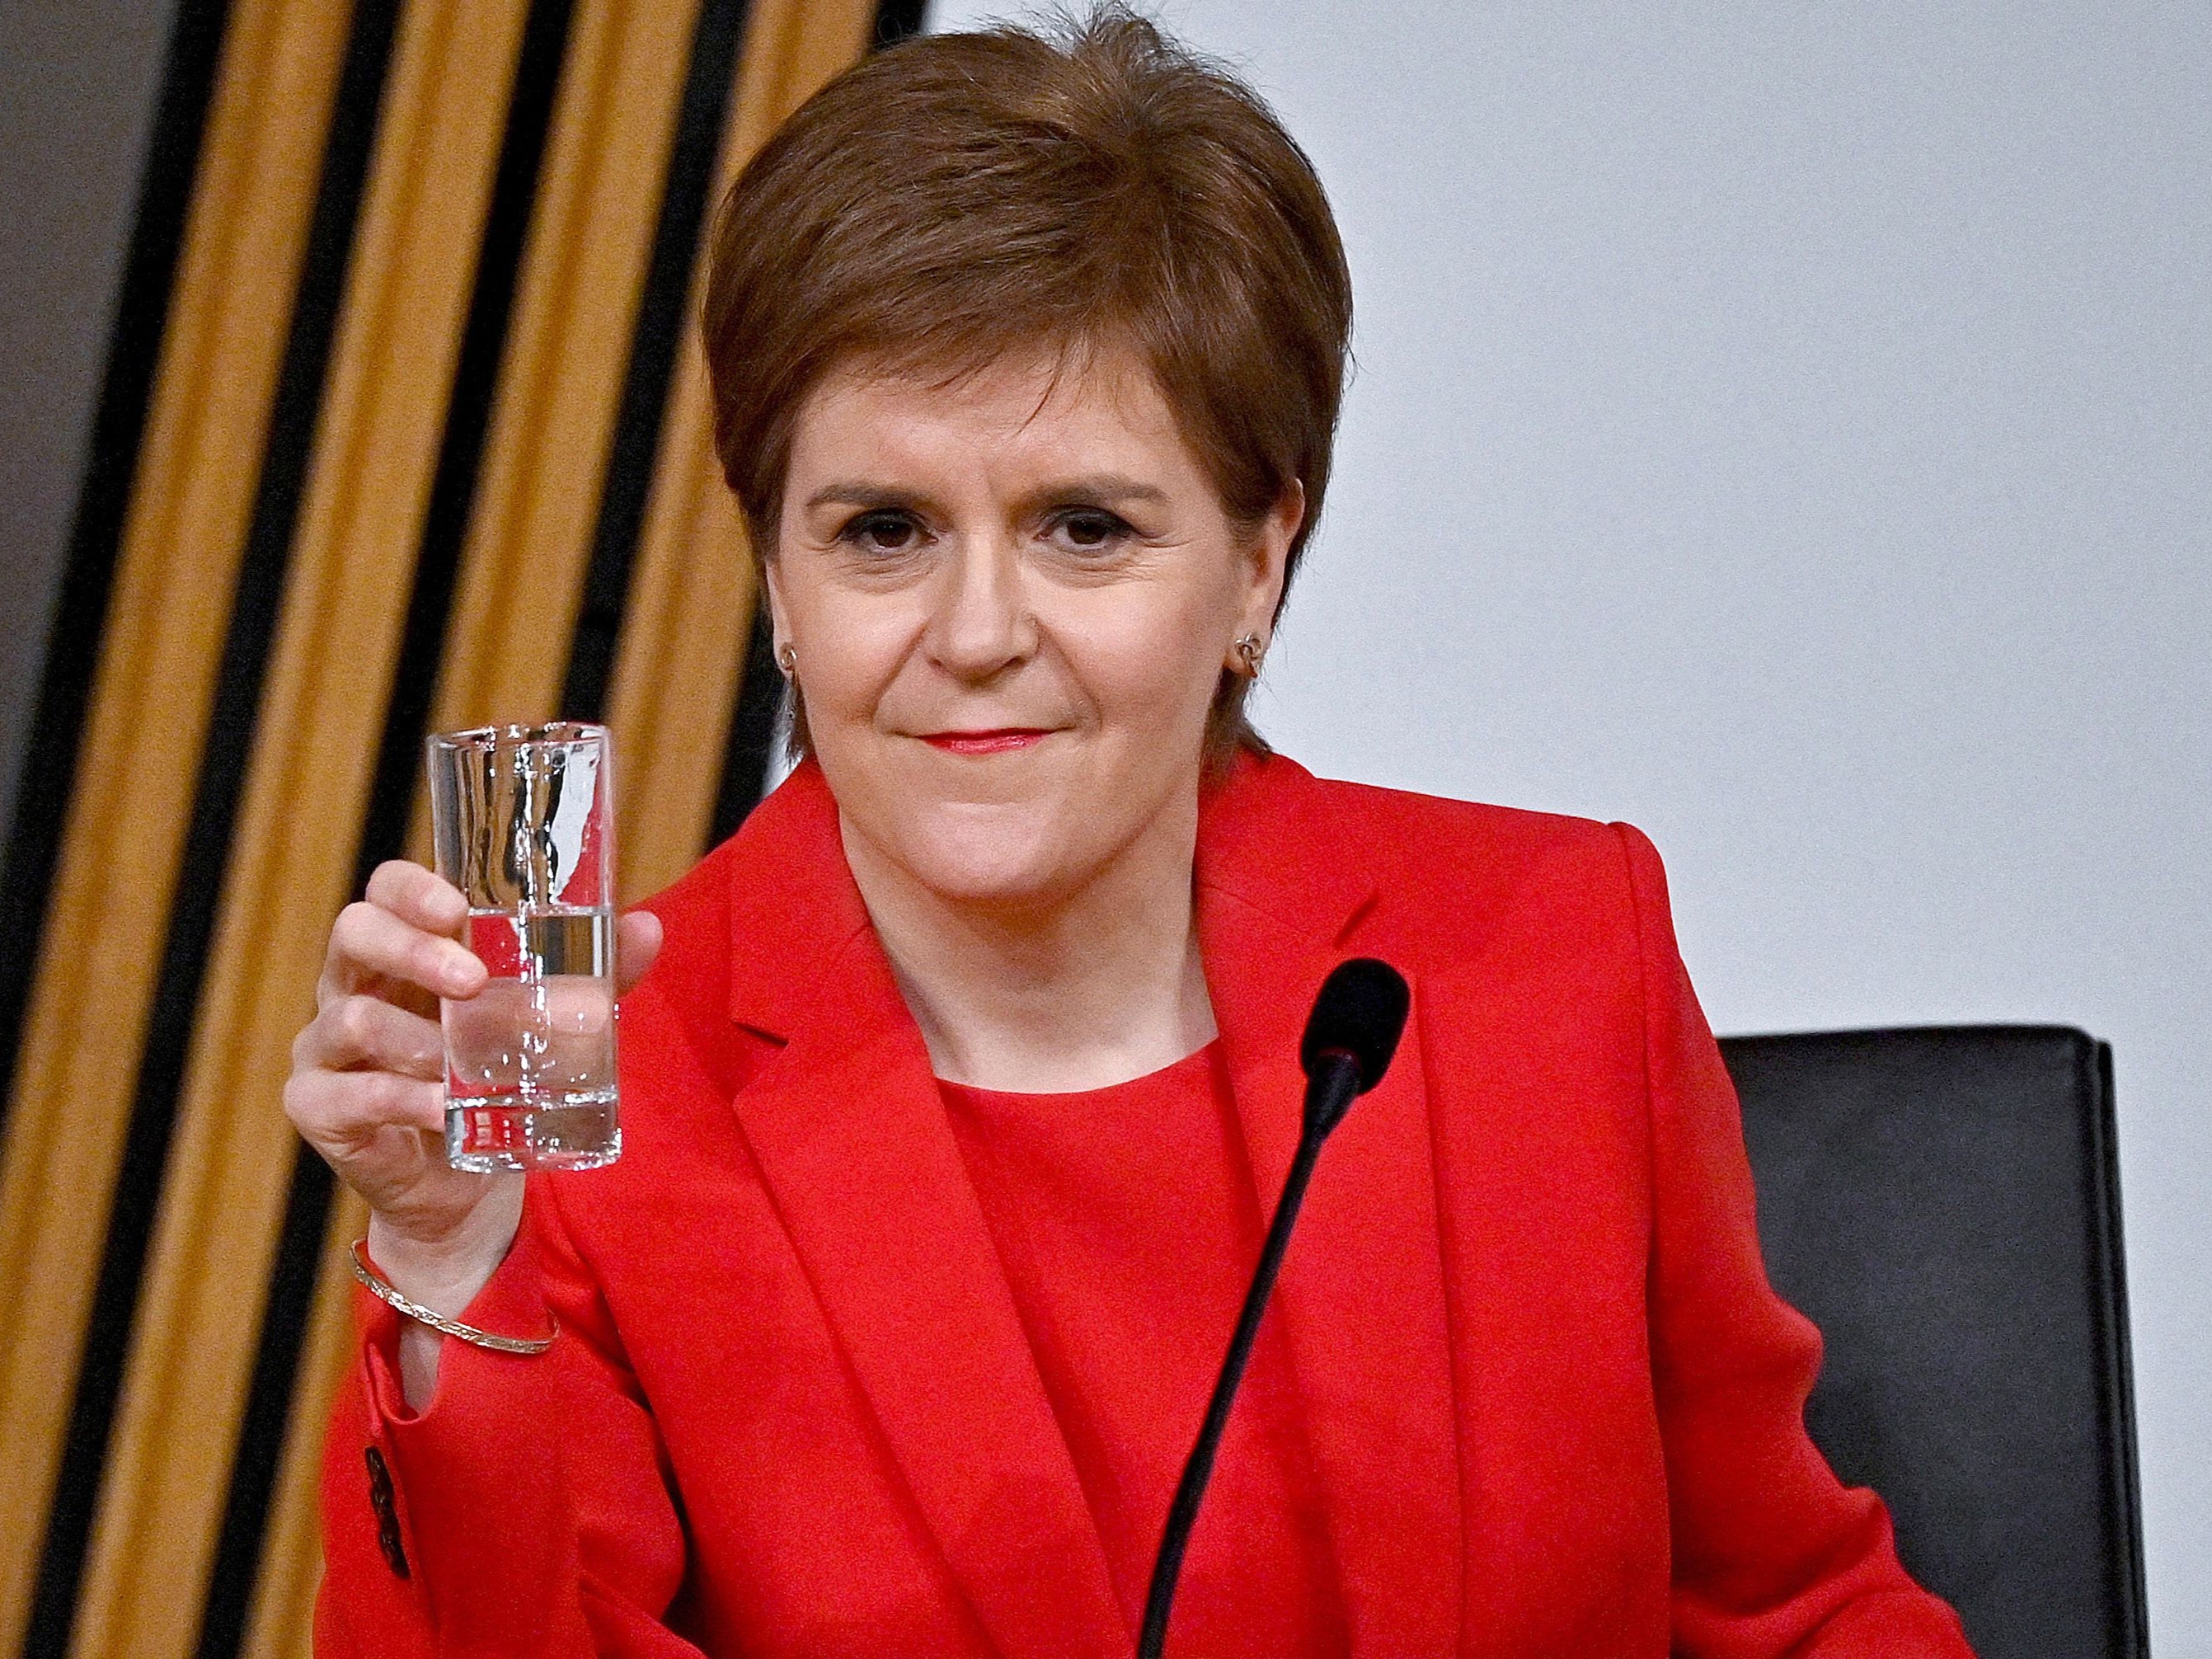 Nicola Sturgeon takes a drink as she gives evidence to a committee earlier this month